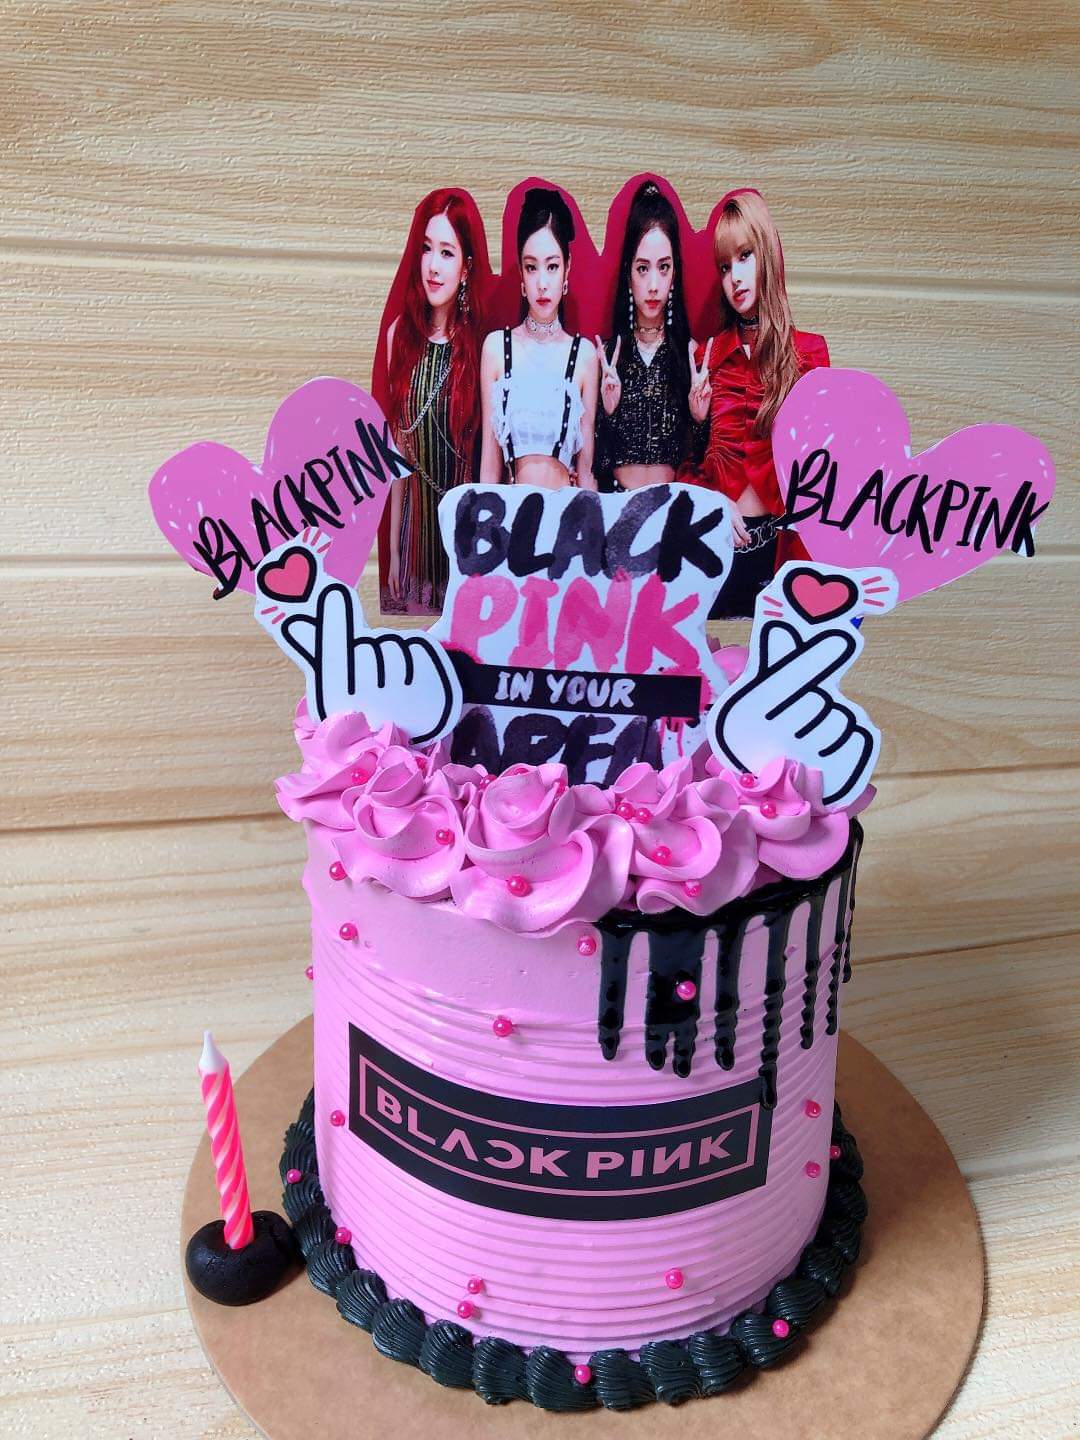 HASTHIP® Blackpink Theme Cake Decoration Cake Topper Party Supplies Kit  with Banner, Ballon, Cake Topper, Cupcake Topper Birthday Cake Decoration  Blackpink Fans Party Decor : Amazon.in: Toys & Games